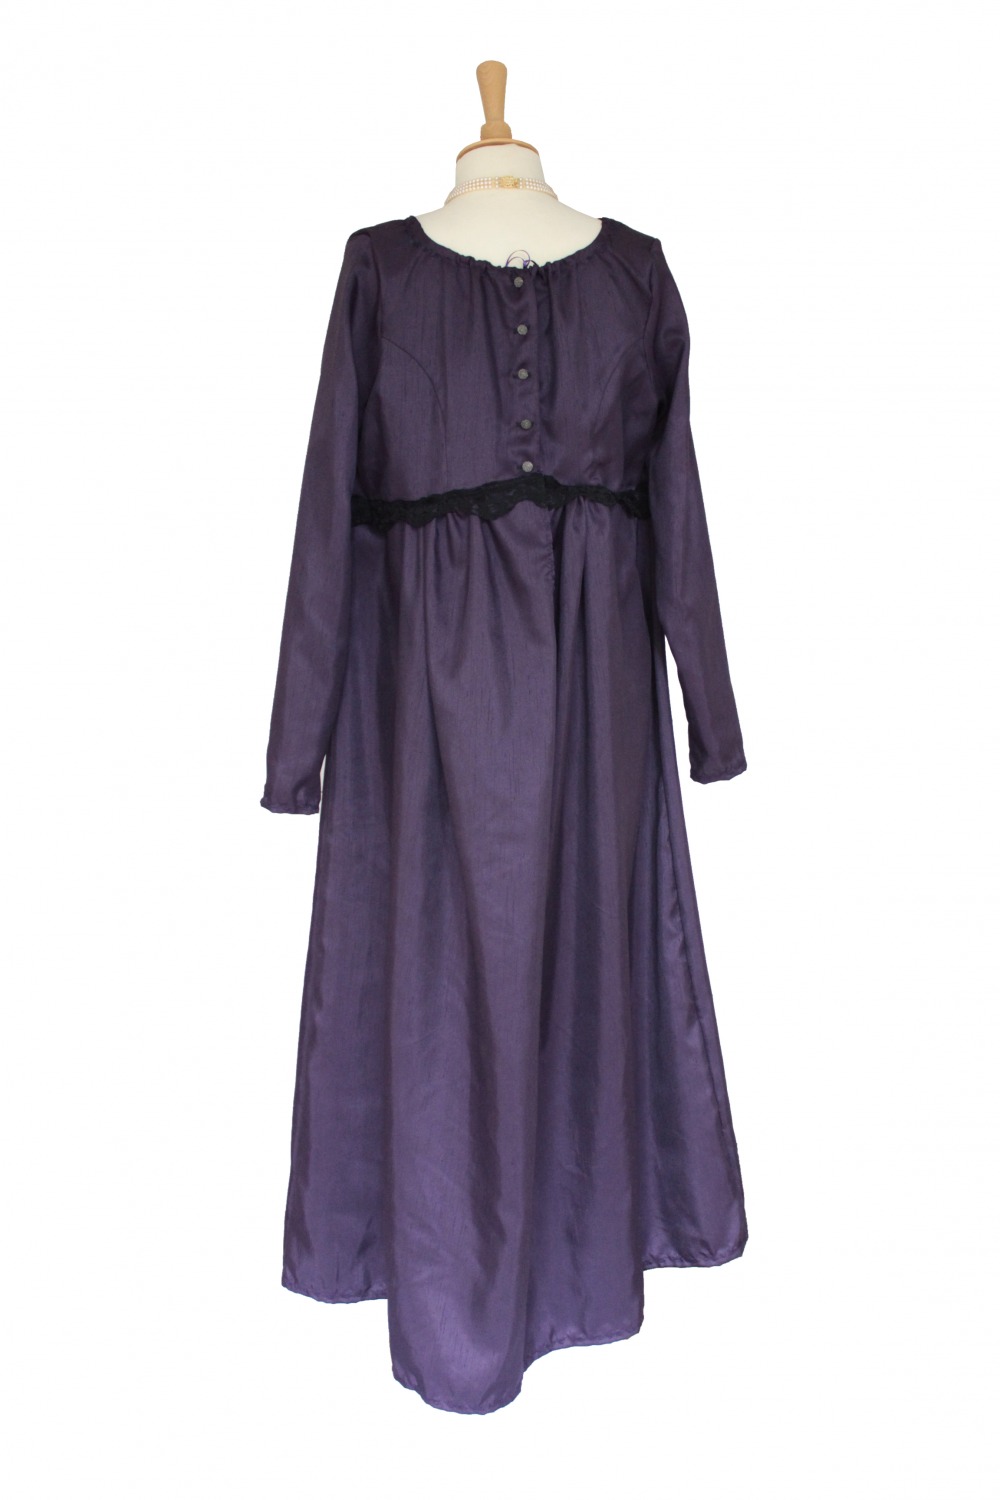 Ladies 18th 19th Regency Jane Austen Costume Long Sleeved Evening Ball Gown Size 20 - 22 Image